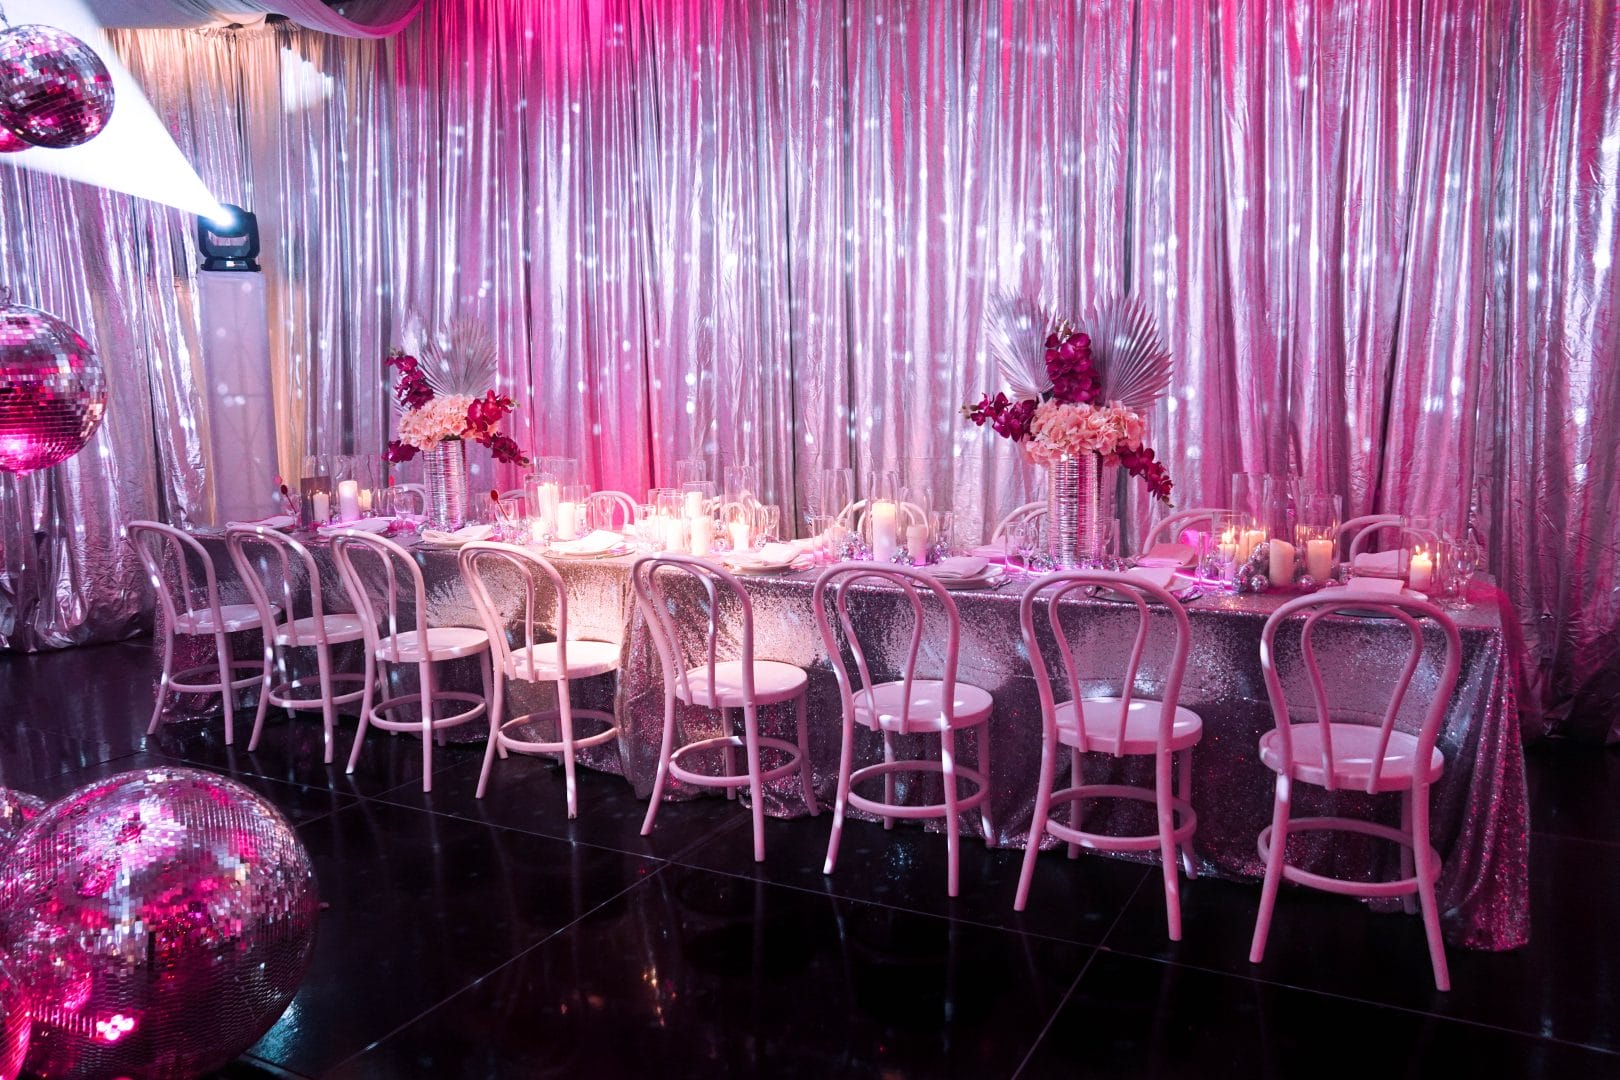 Long table setup featuring pink and silver decor, mirror balls, silver drape, pink lighting